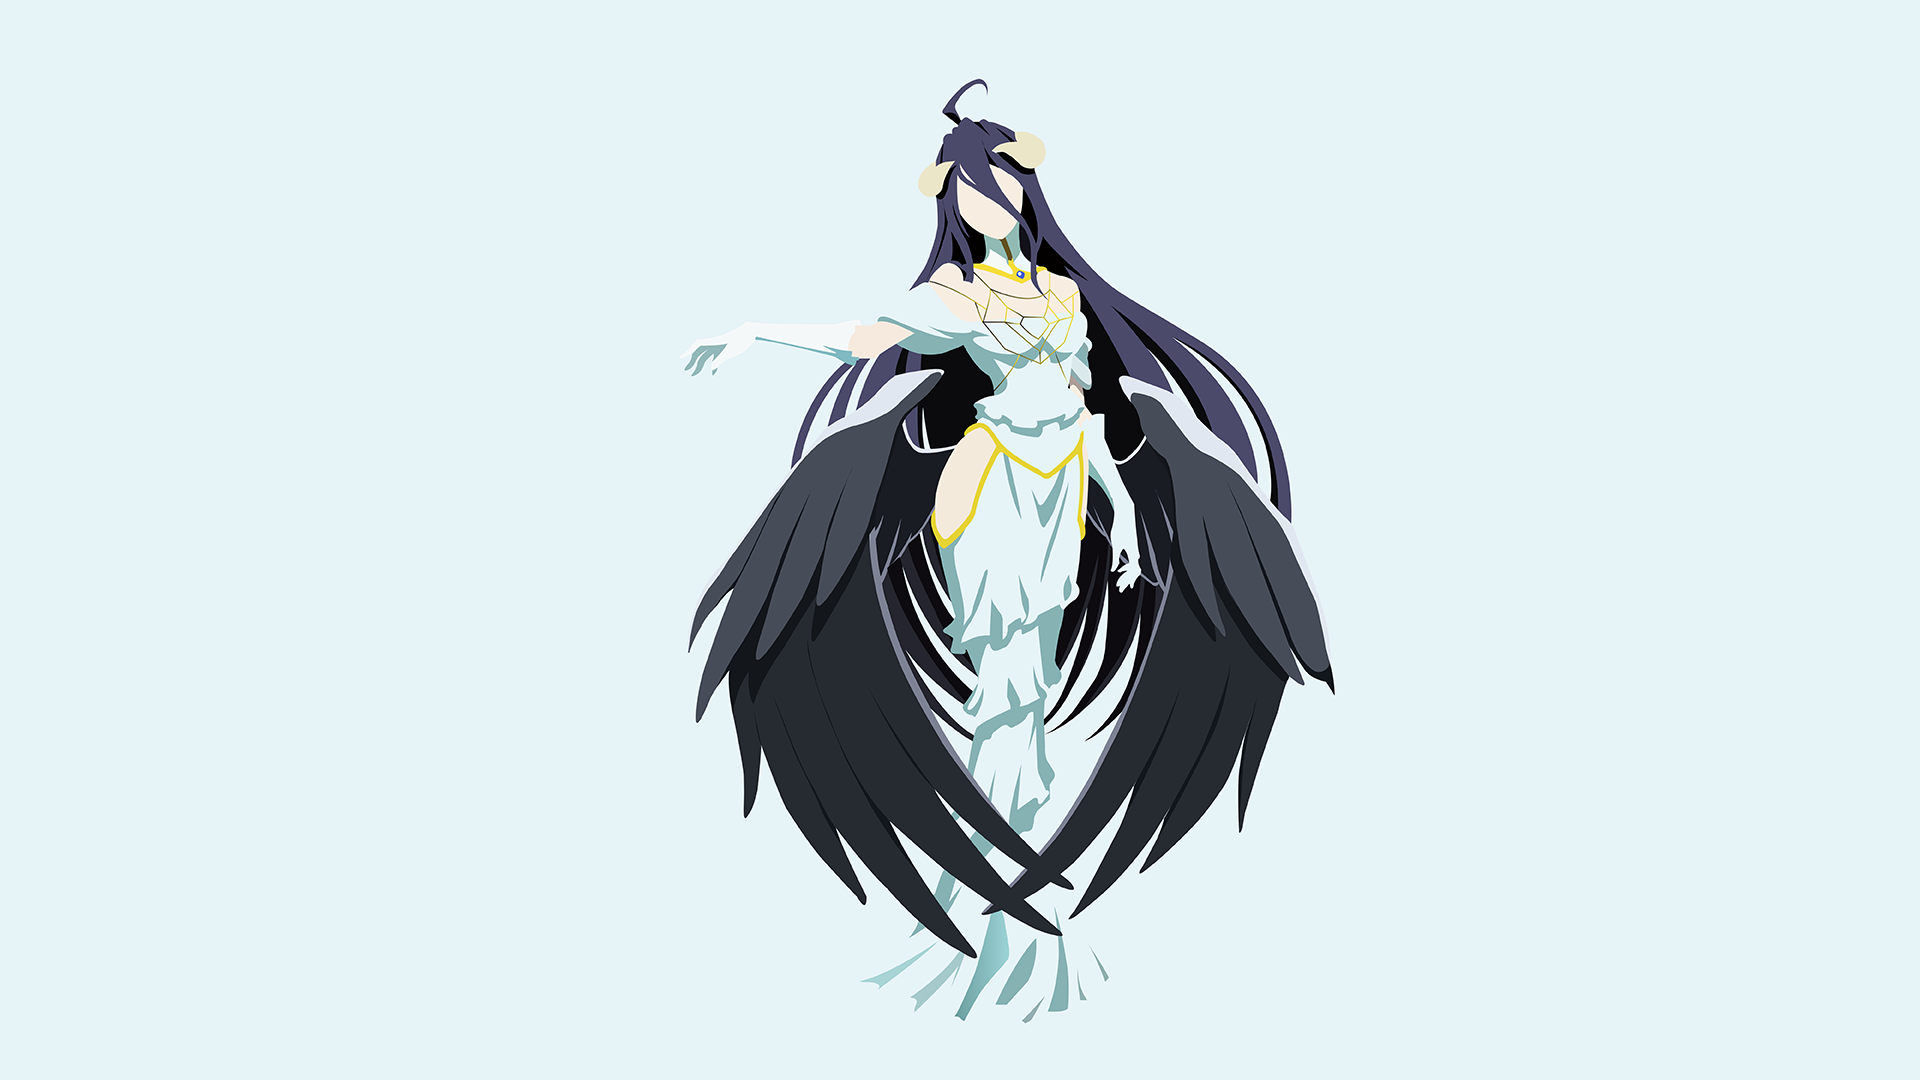 Albedo Hd Wallpaper Background Image 1920x1080 Wallpaper Abyss